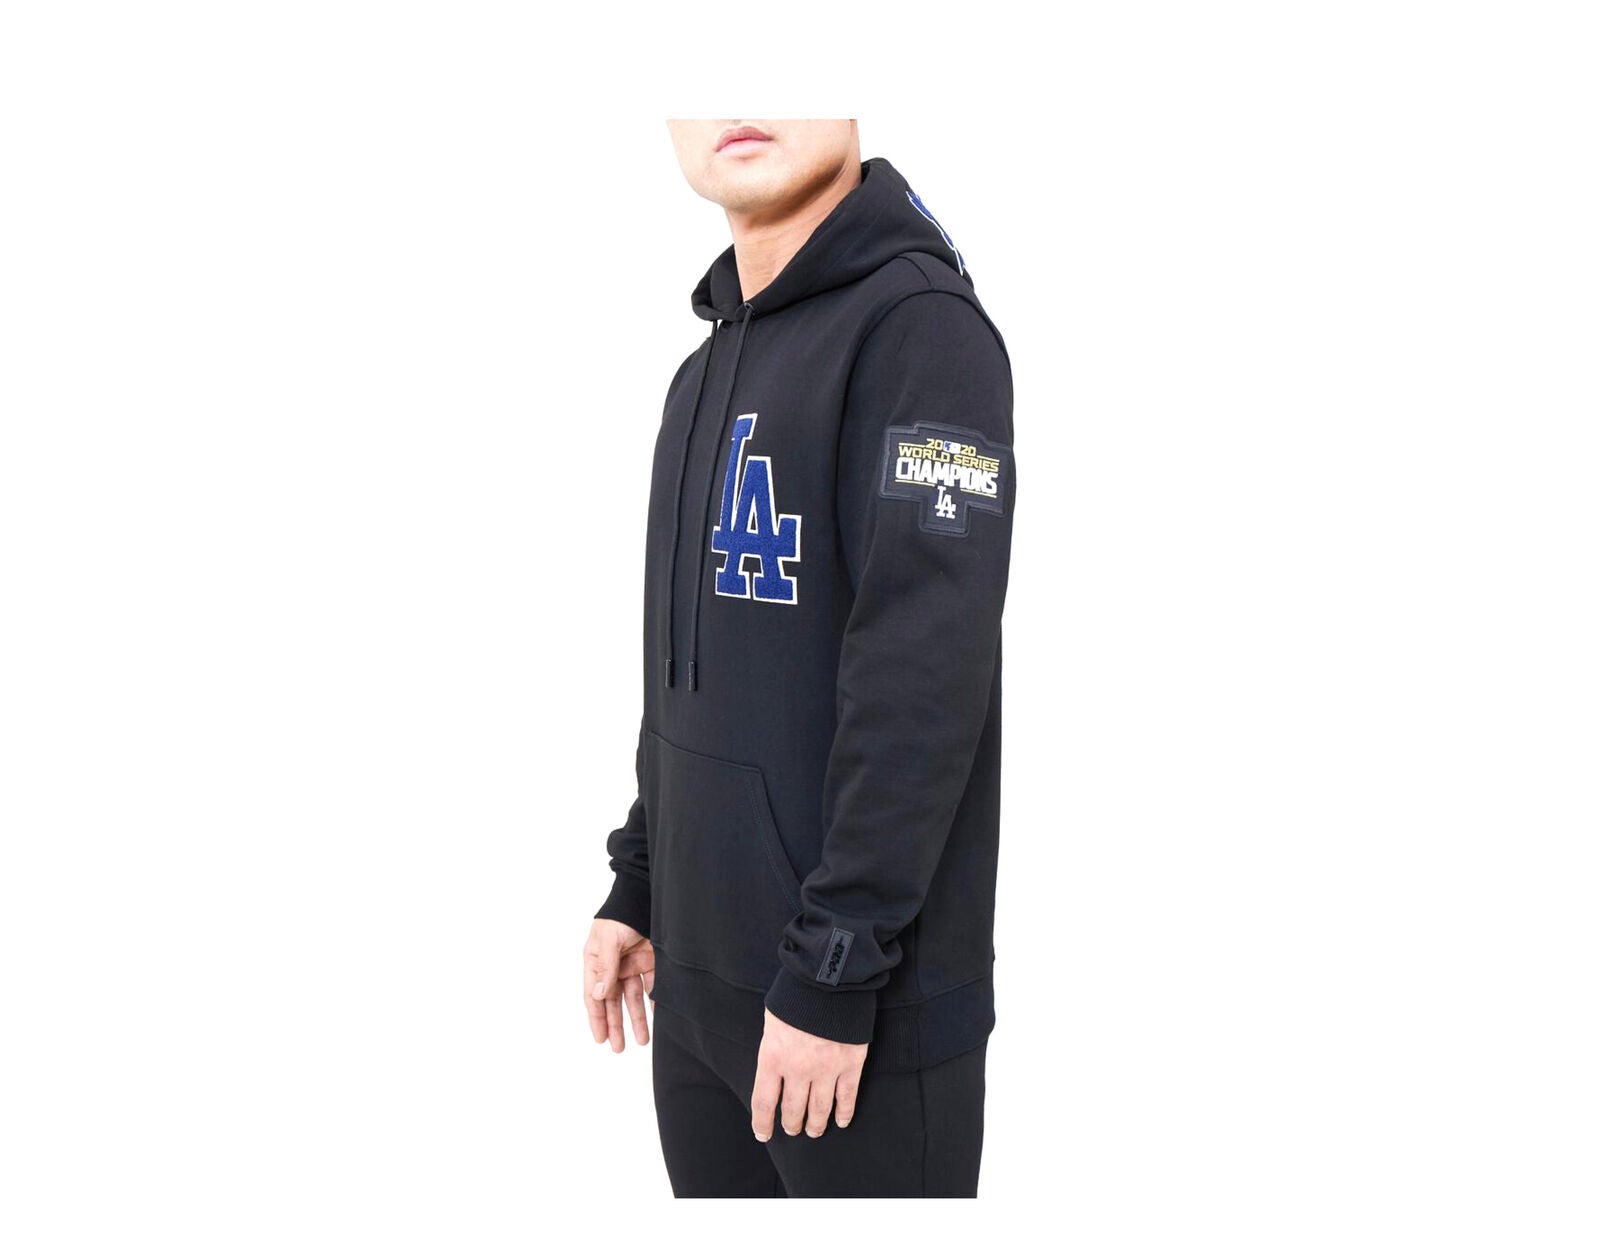  MLB Los Angeles Dodgers Pullover Hooded Top